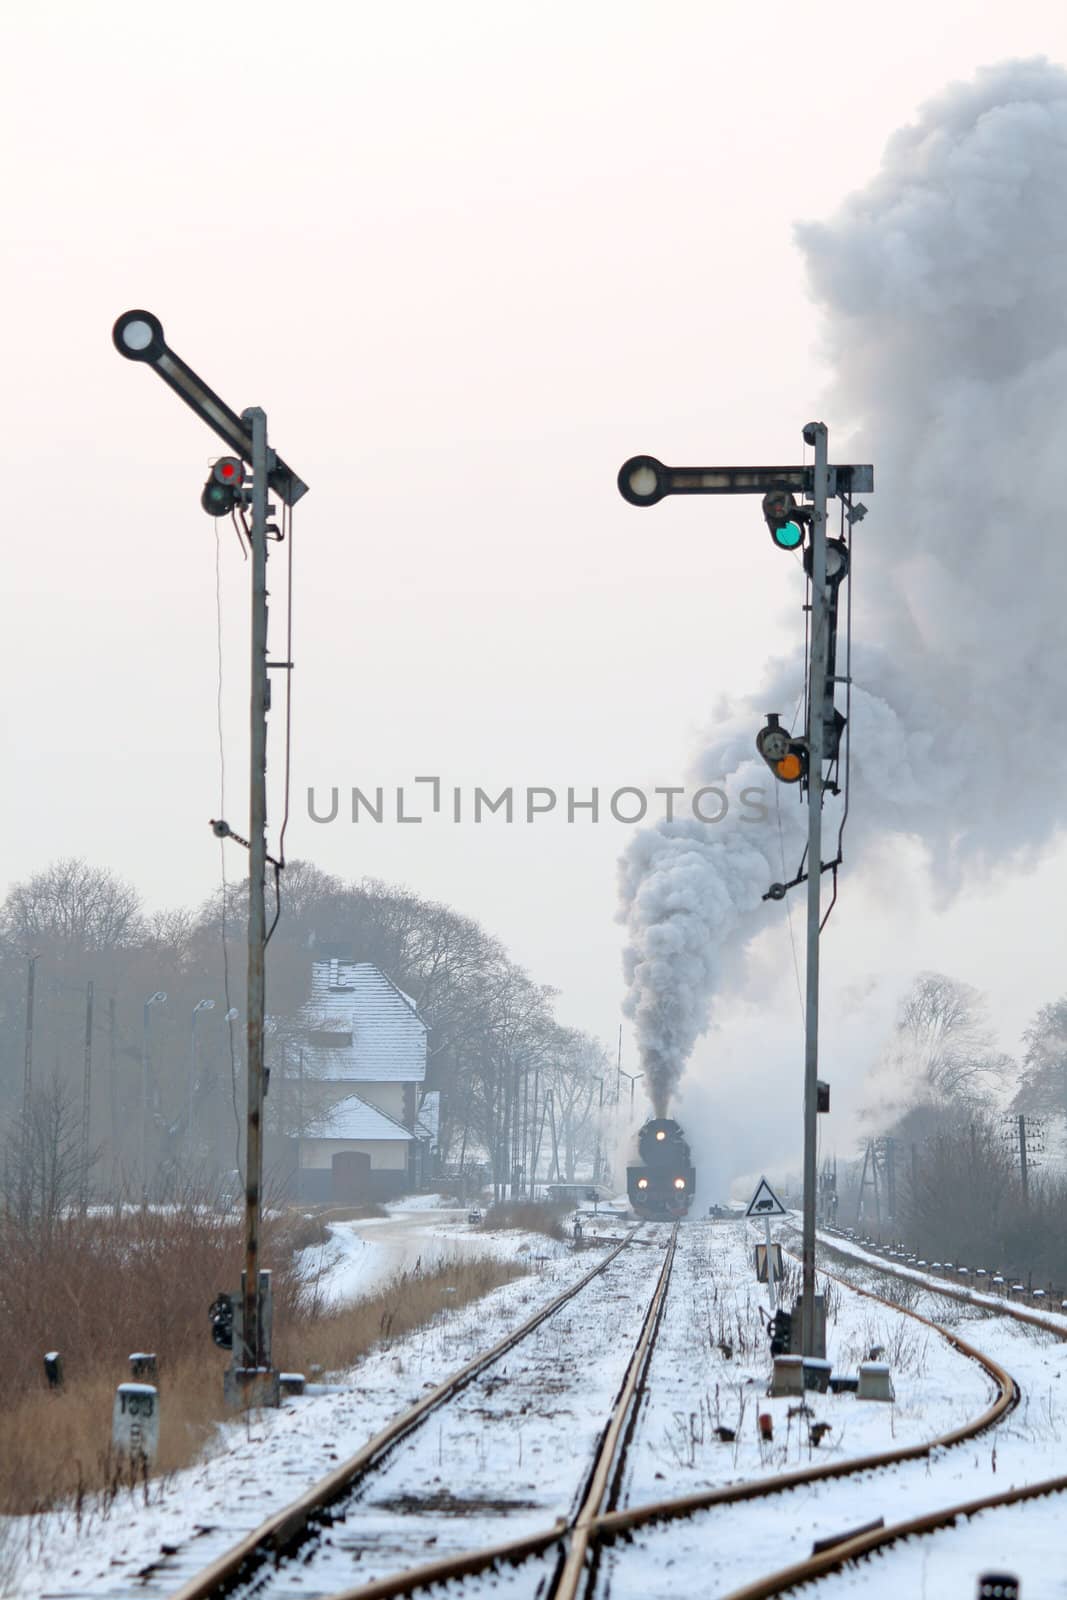 Old retro steam train starting from the station during wintertime
